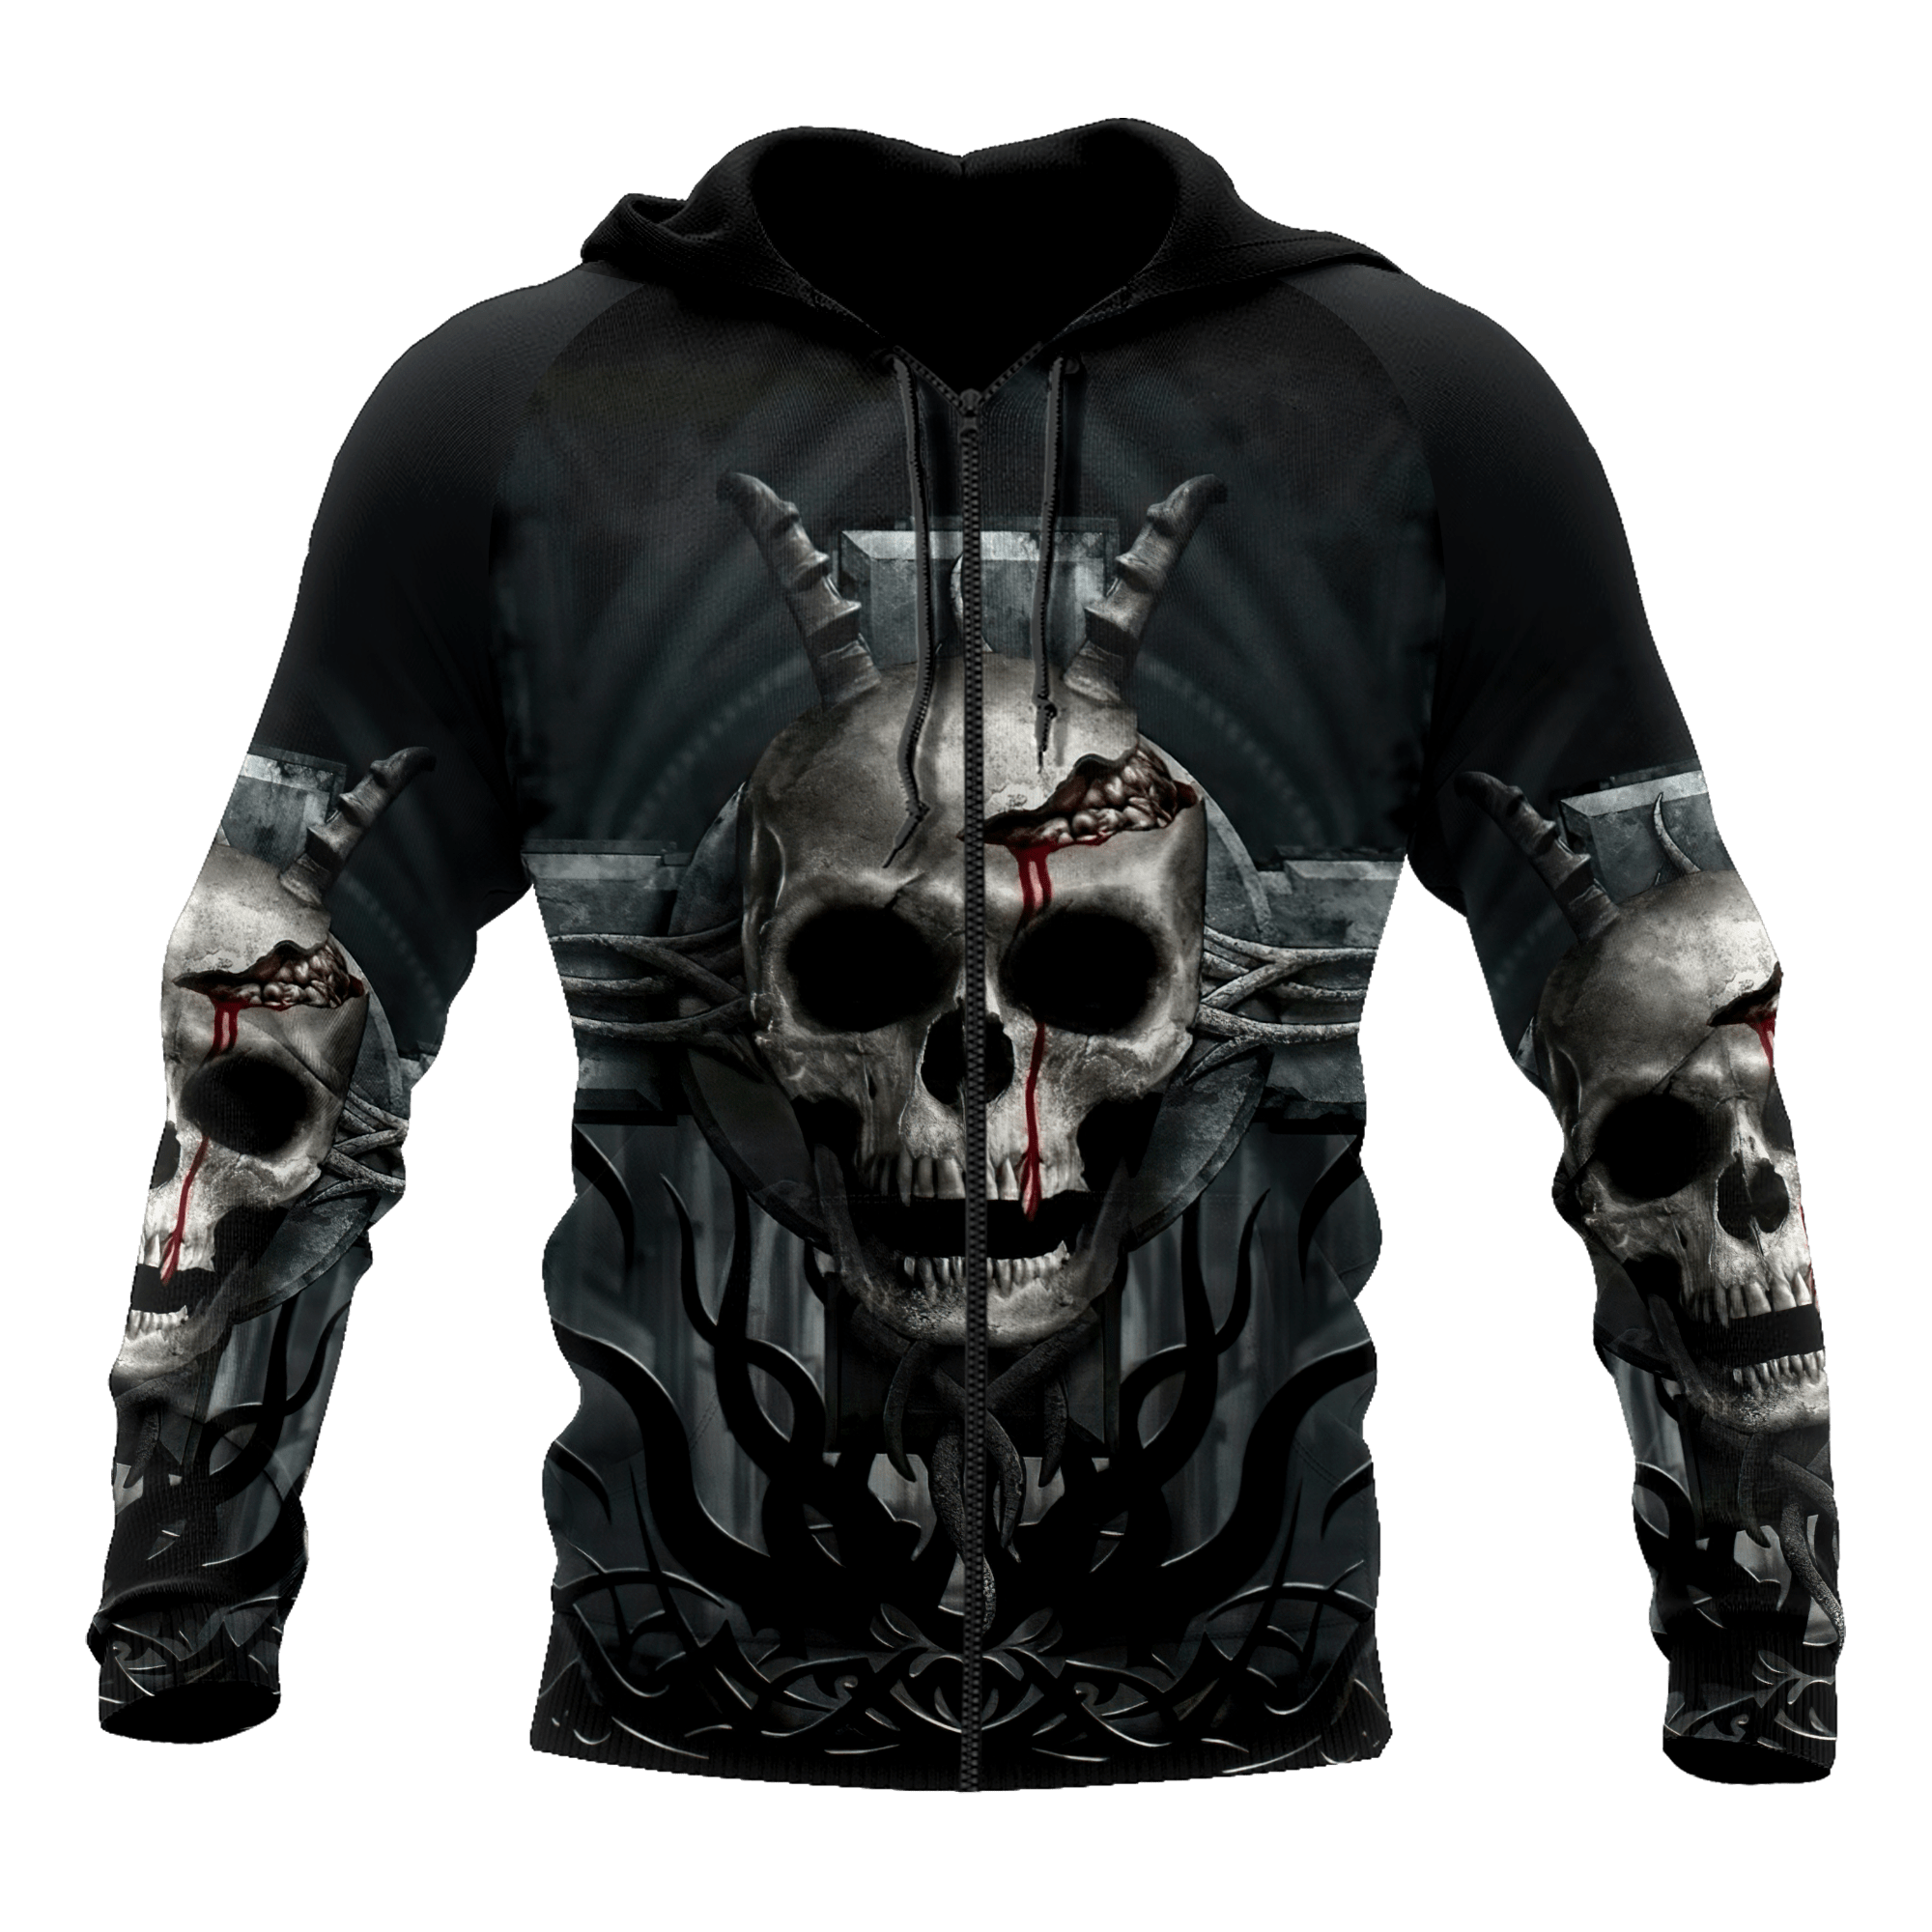 Premium Skull Cross All Over Printed Shirts For Men And Women MEI